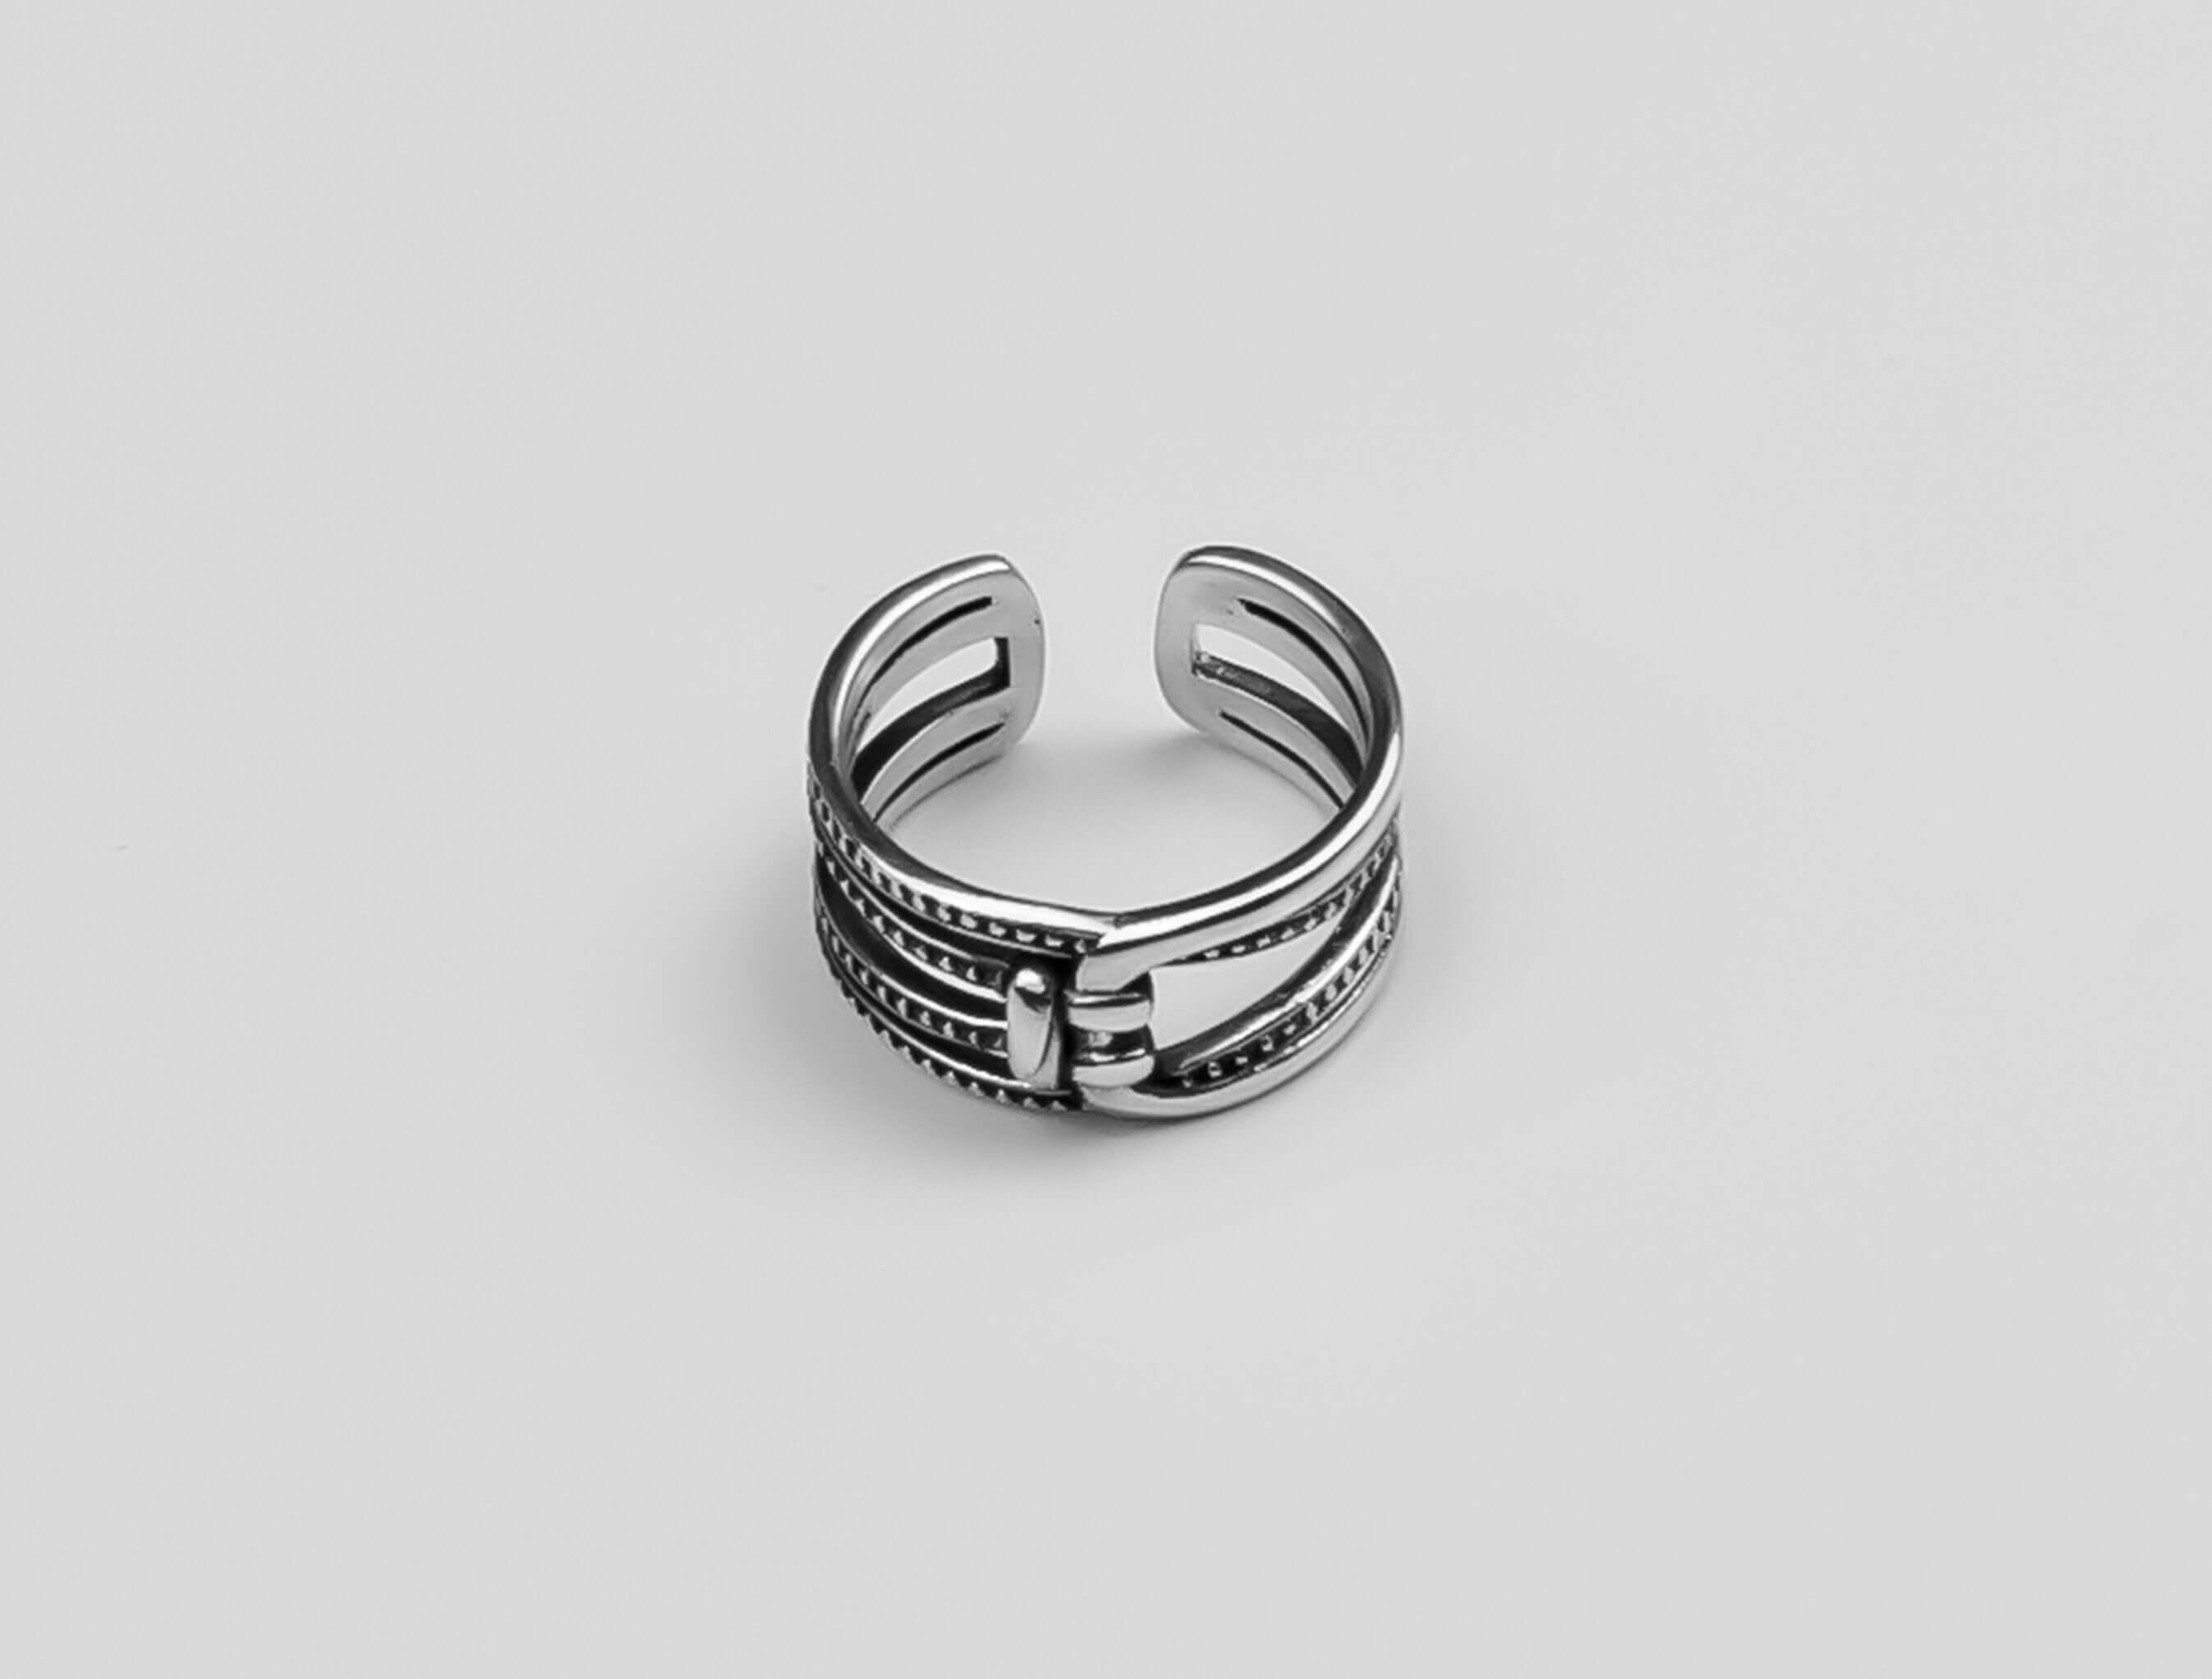 Beautiful Classic Chunky Silver Ring, Boho Silver Ring, Adjustable Silver Ring, Best Gift for Her, Sterling Silver Unique Ring, Silver Open Band available at Moyoni Design